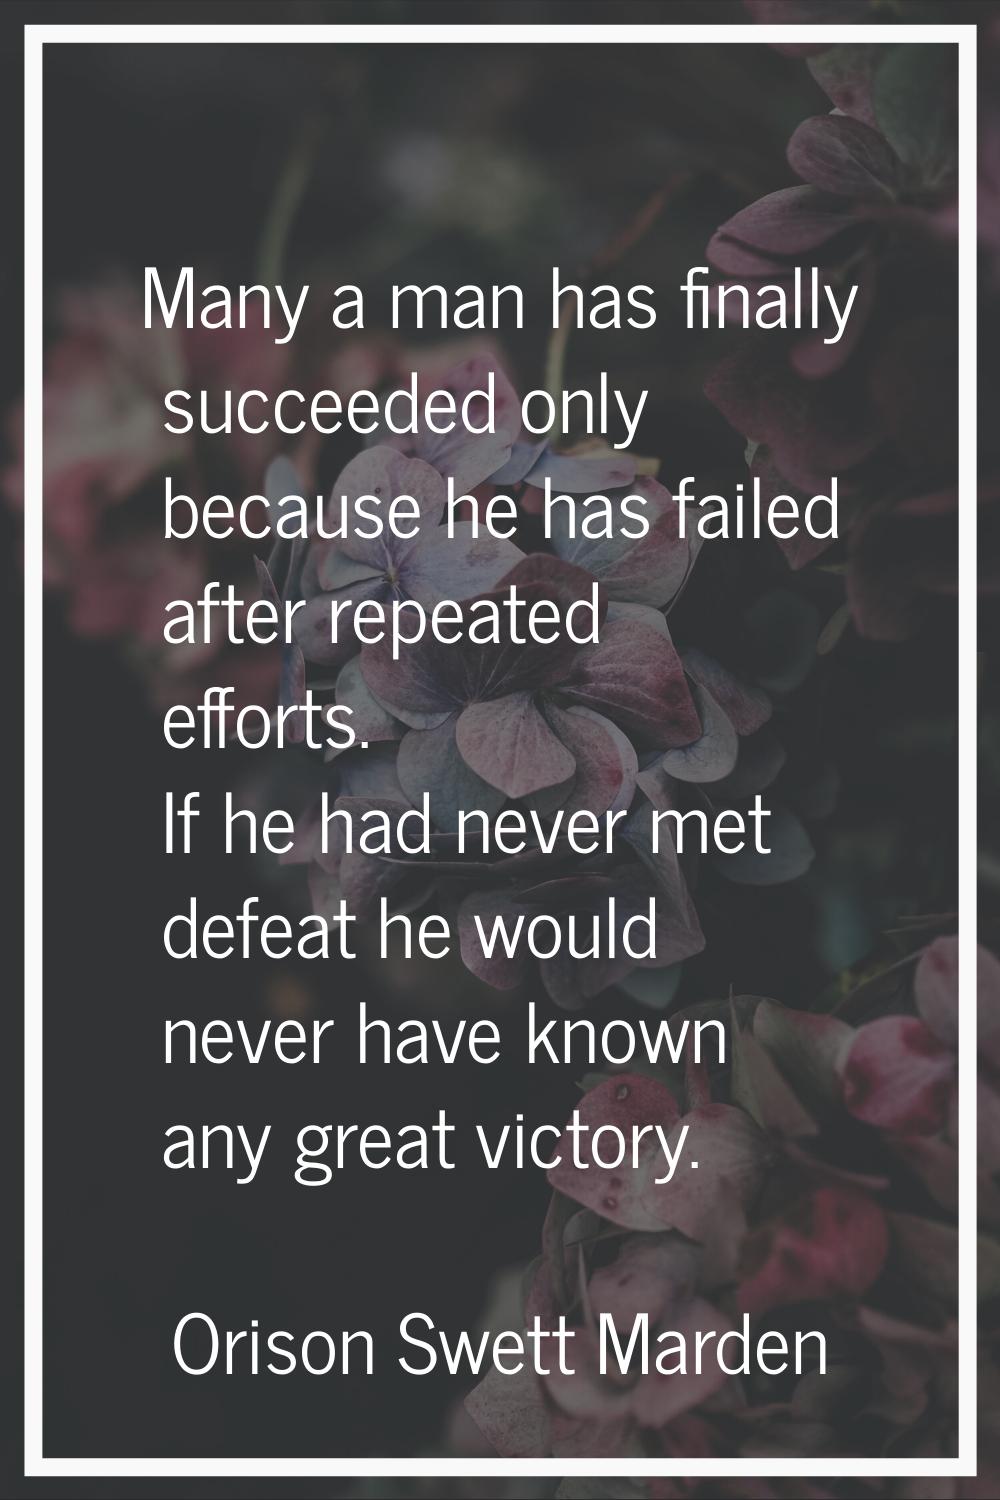 Many a man has finally succeeded only because he has failed after repeated efforts. If he had never